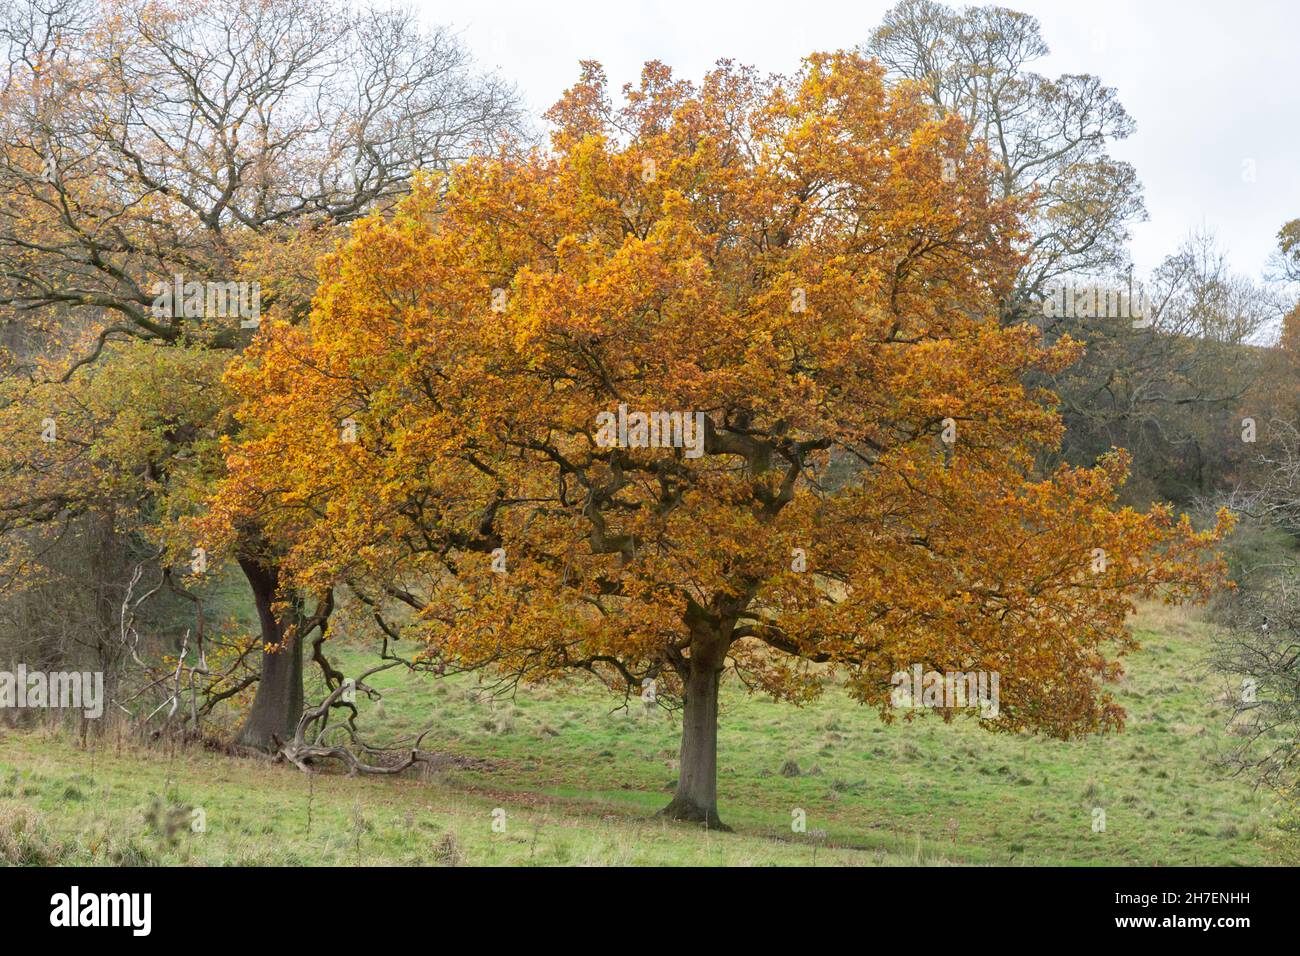 An old English Oak tree in autumn. The leaves turn golden before leaf fall. Stock Photo